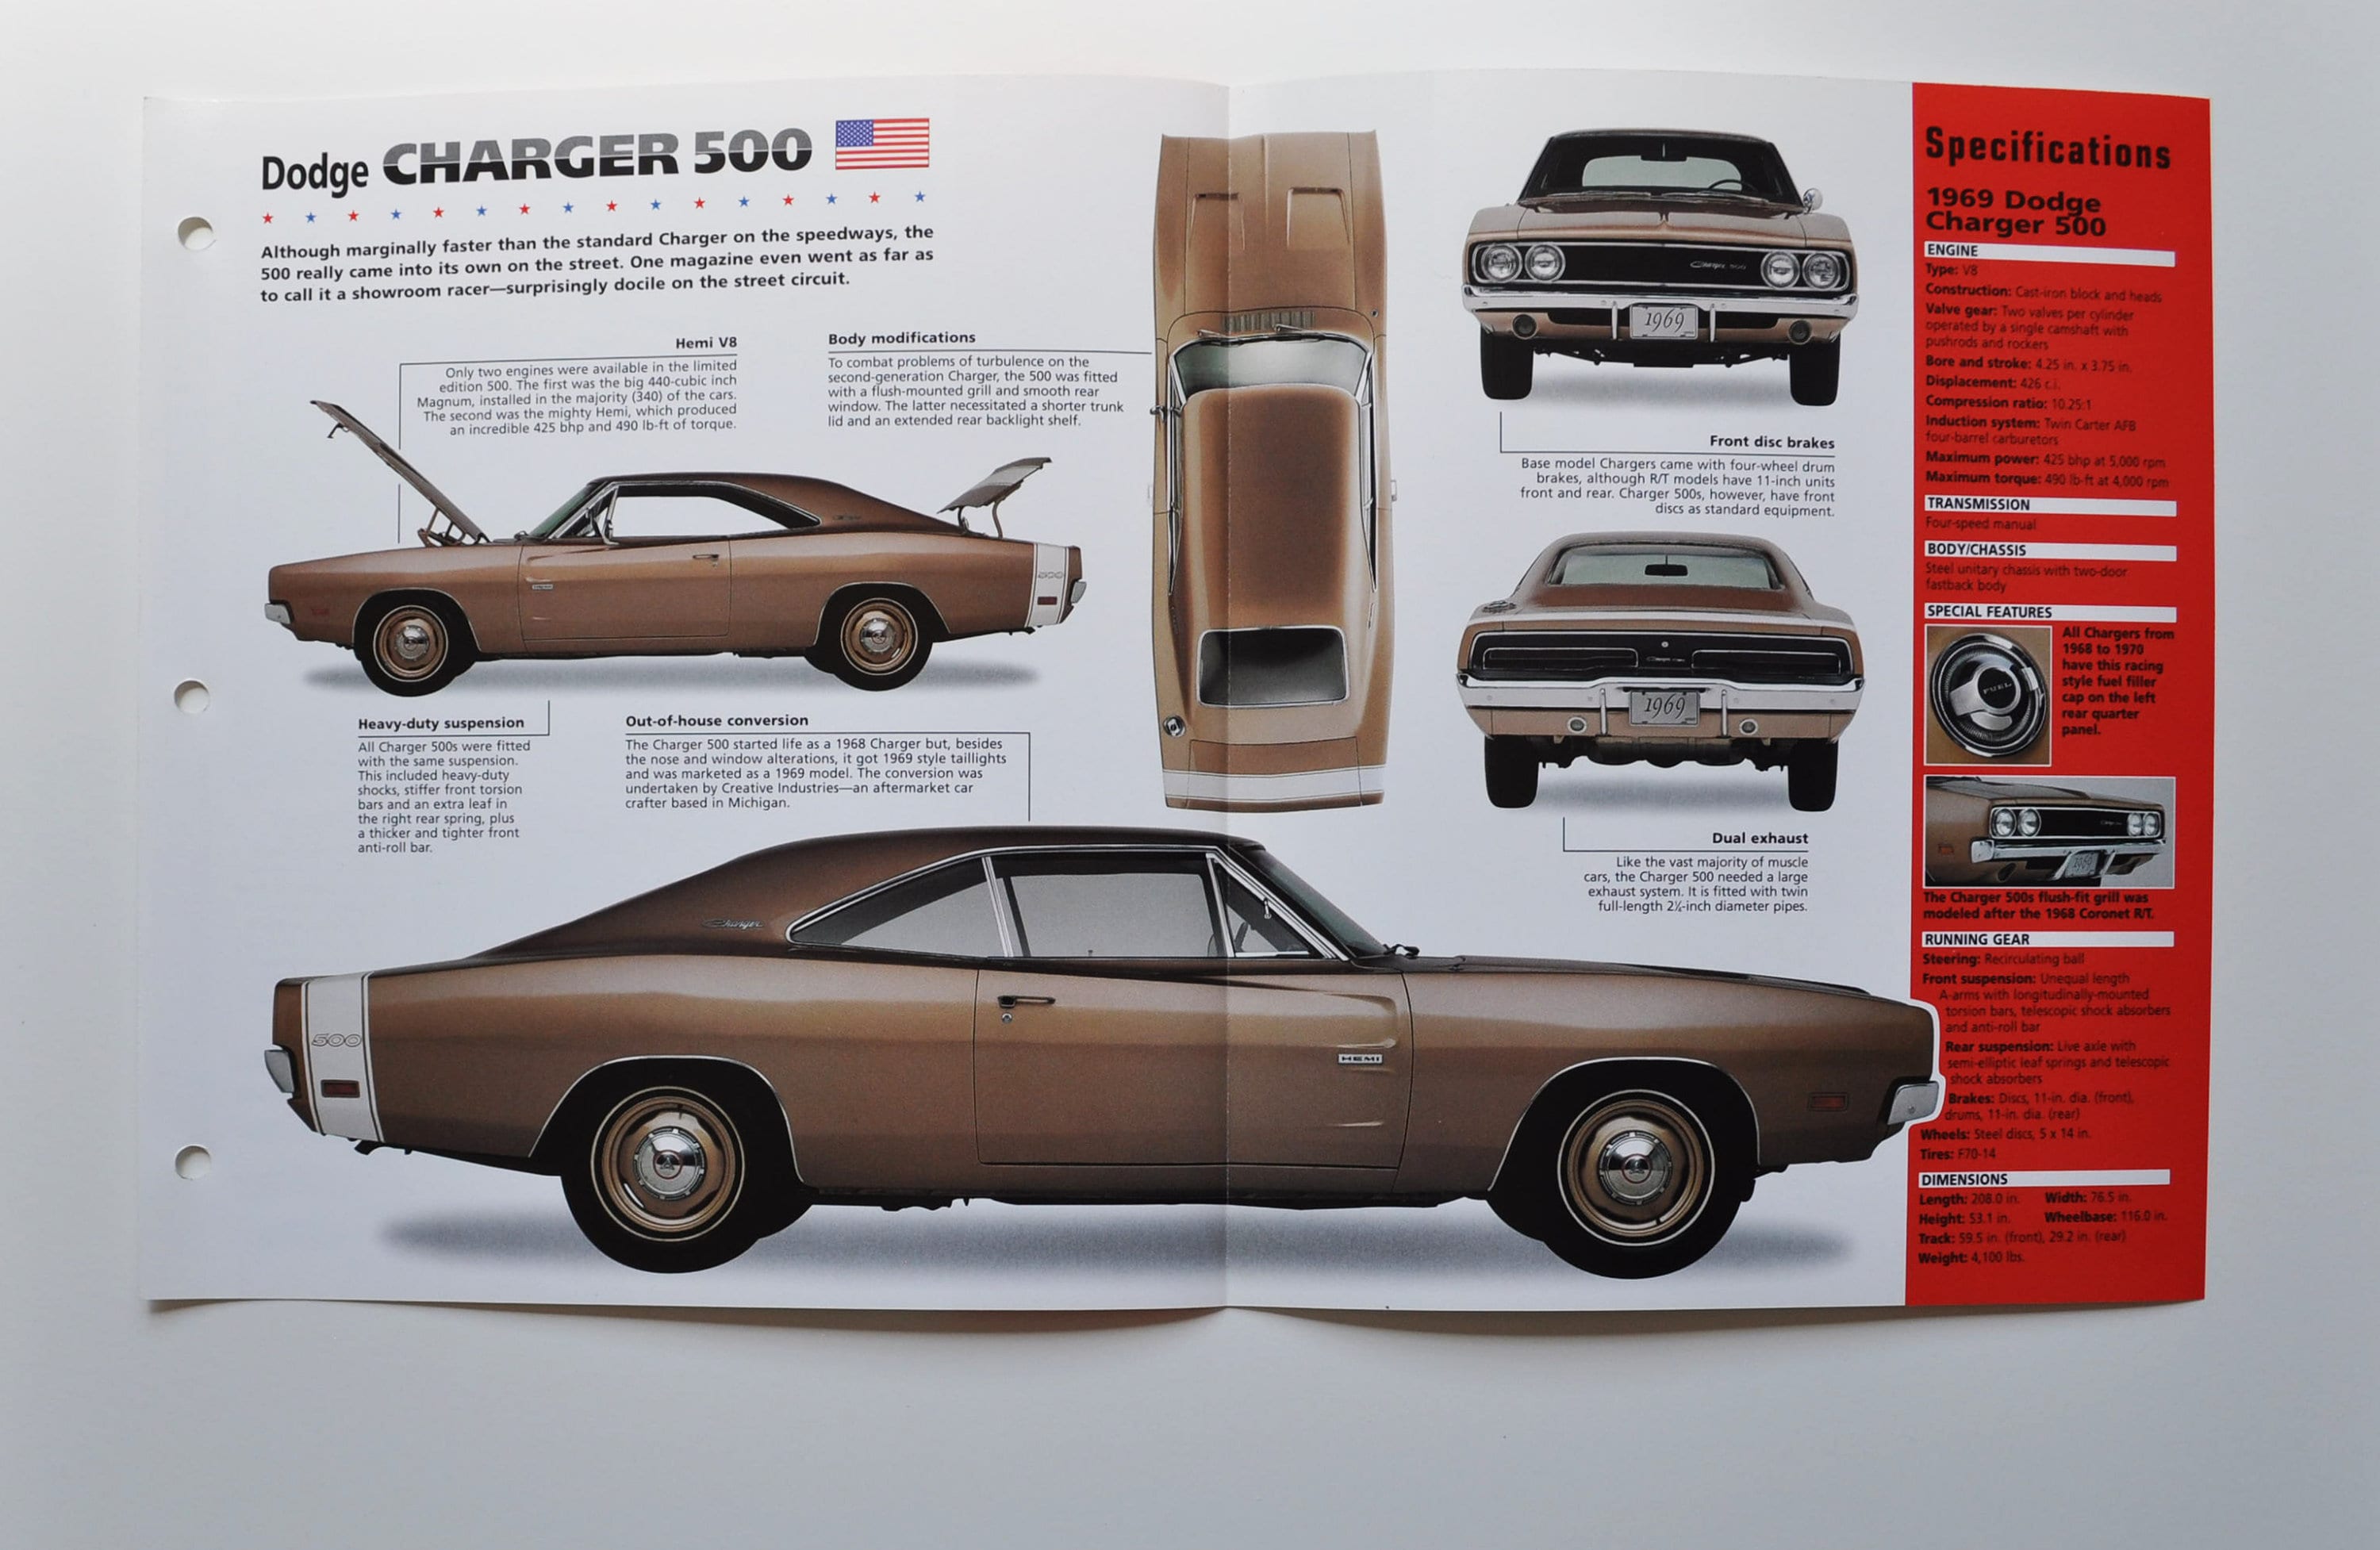 69 Dodge Charger - Etsy Norway